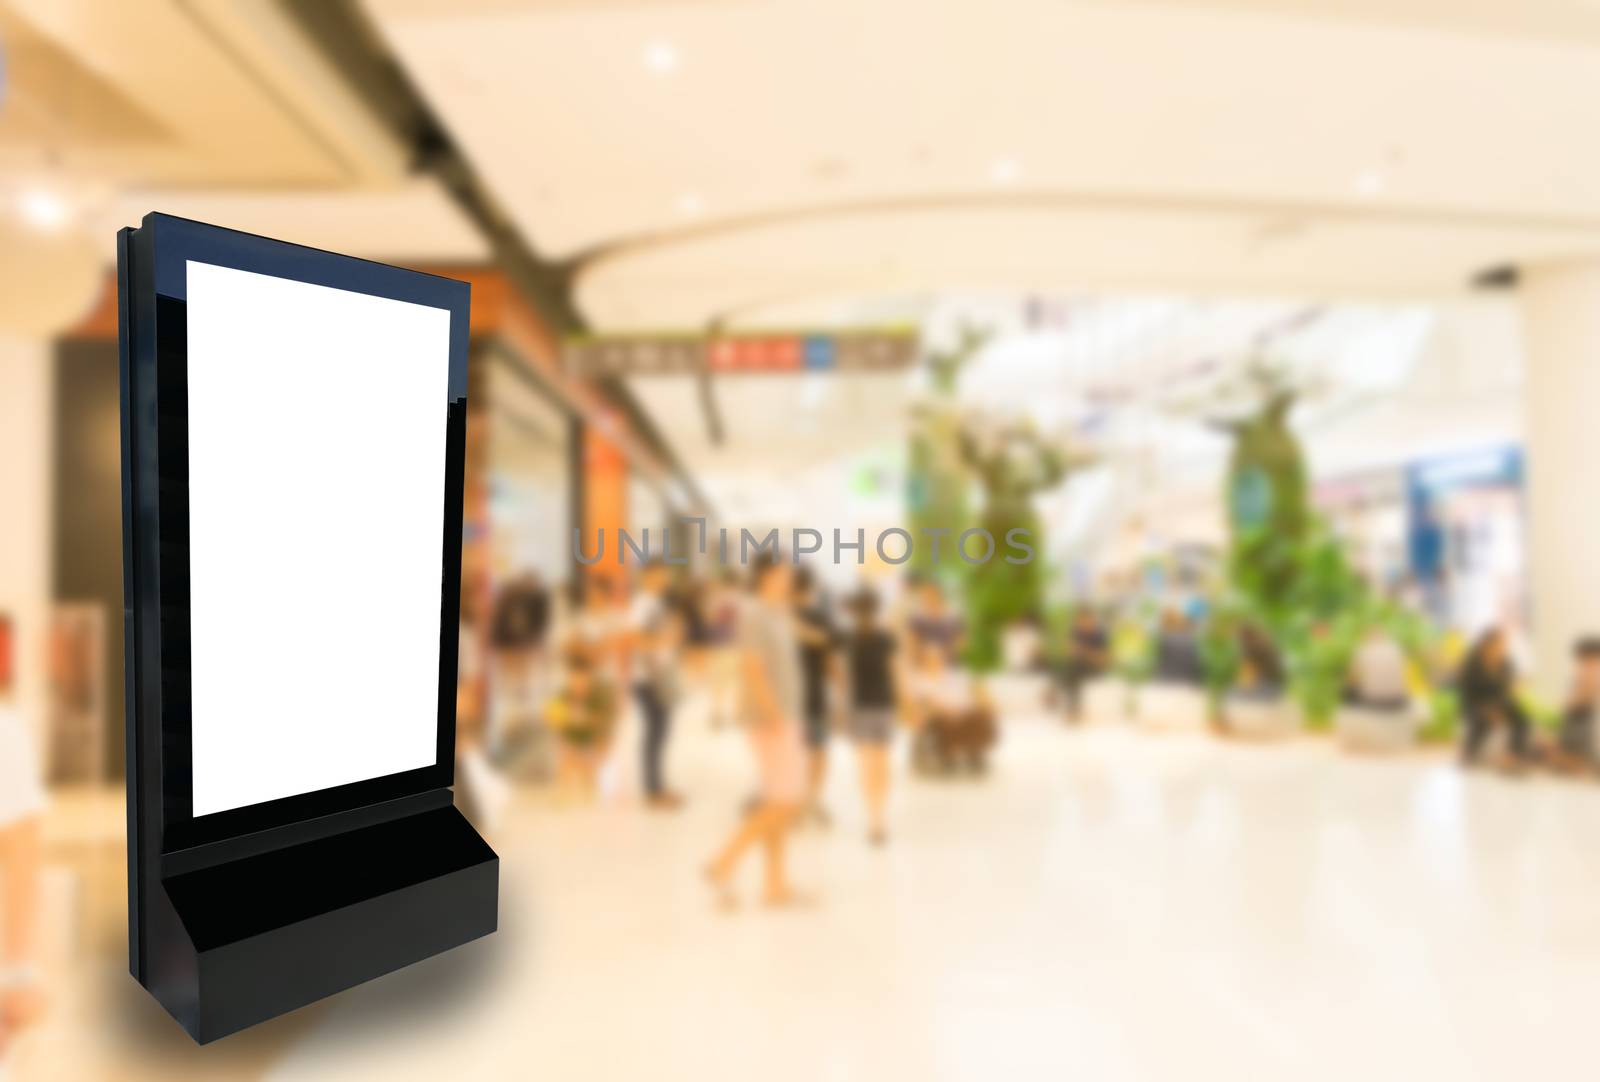 Marketing and advertisement concept digital signage billboard or advertising light box for your text message or media content in department store shopping mall